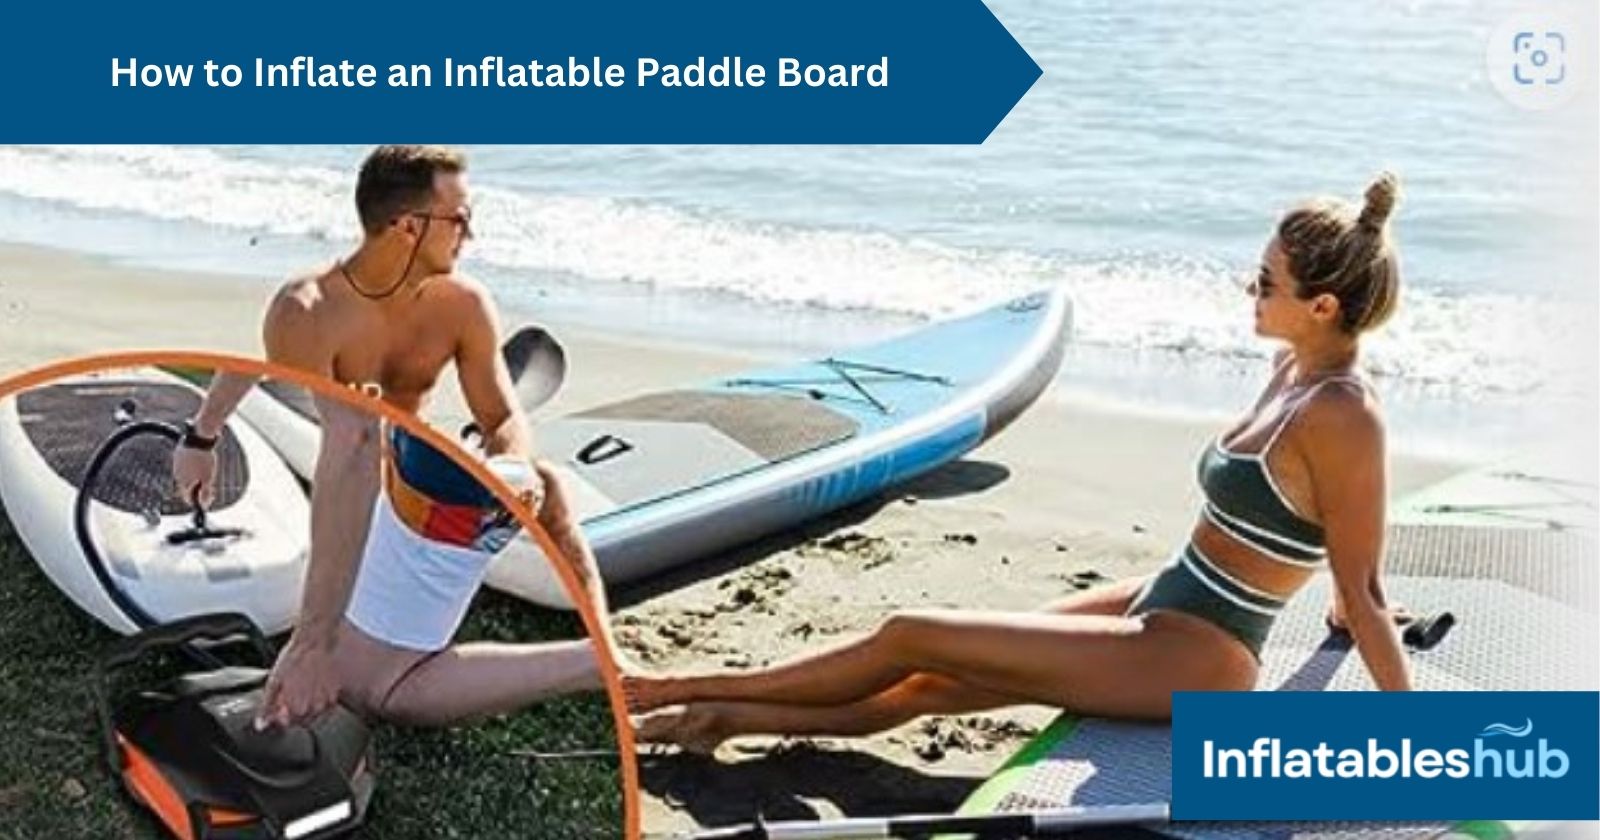 How to inflate an inflatable Paddle Board